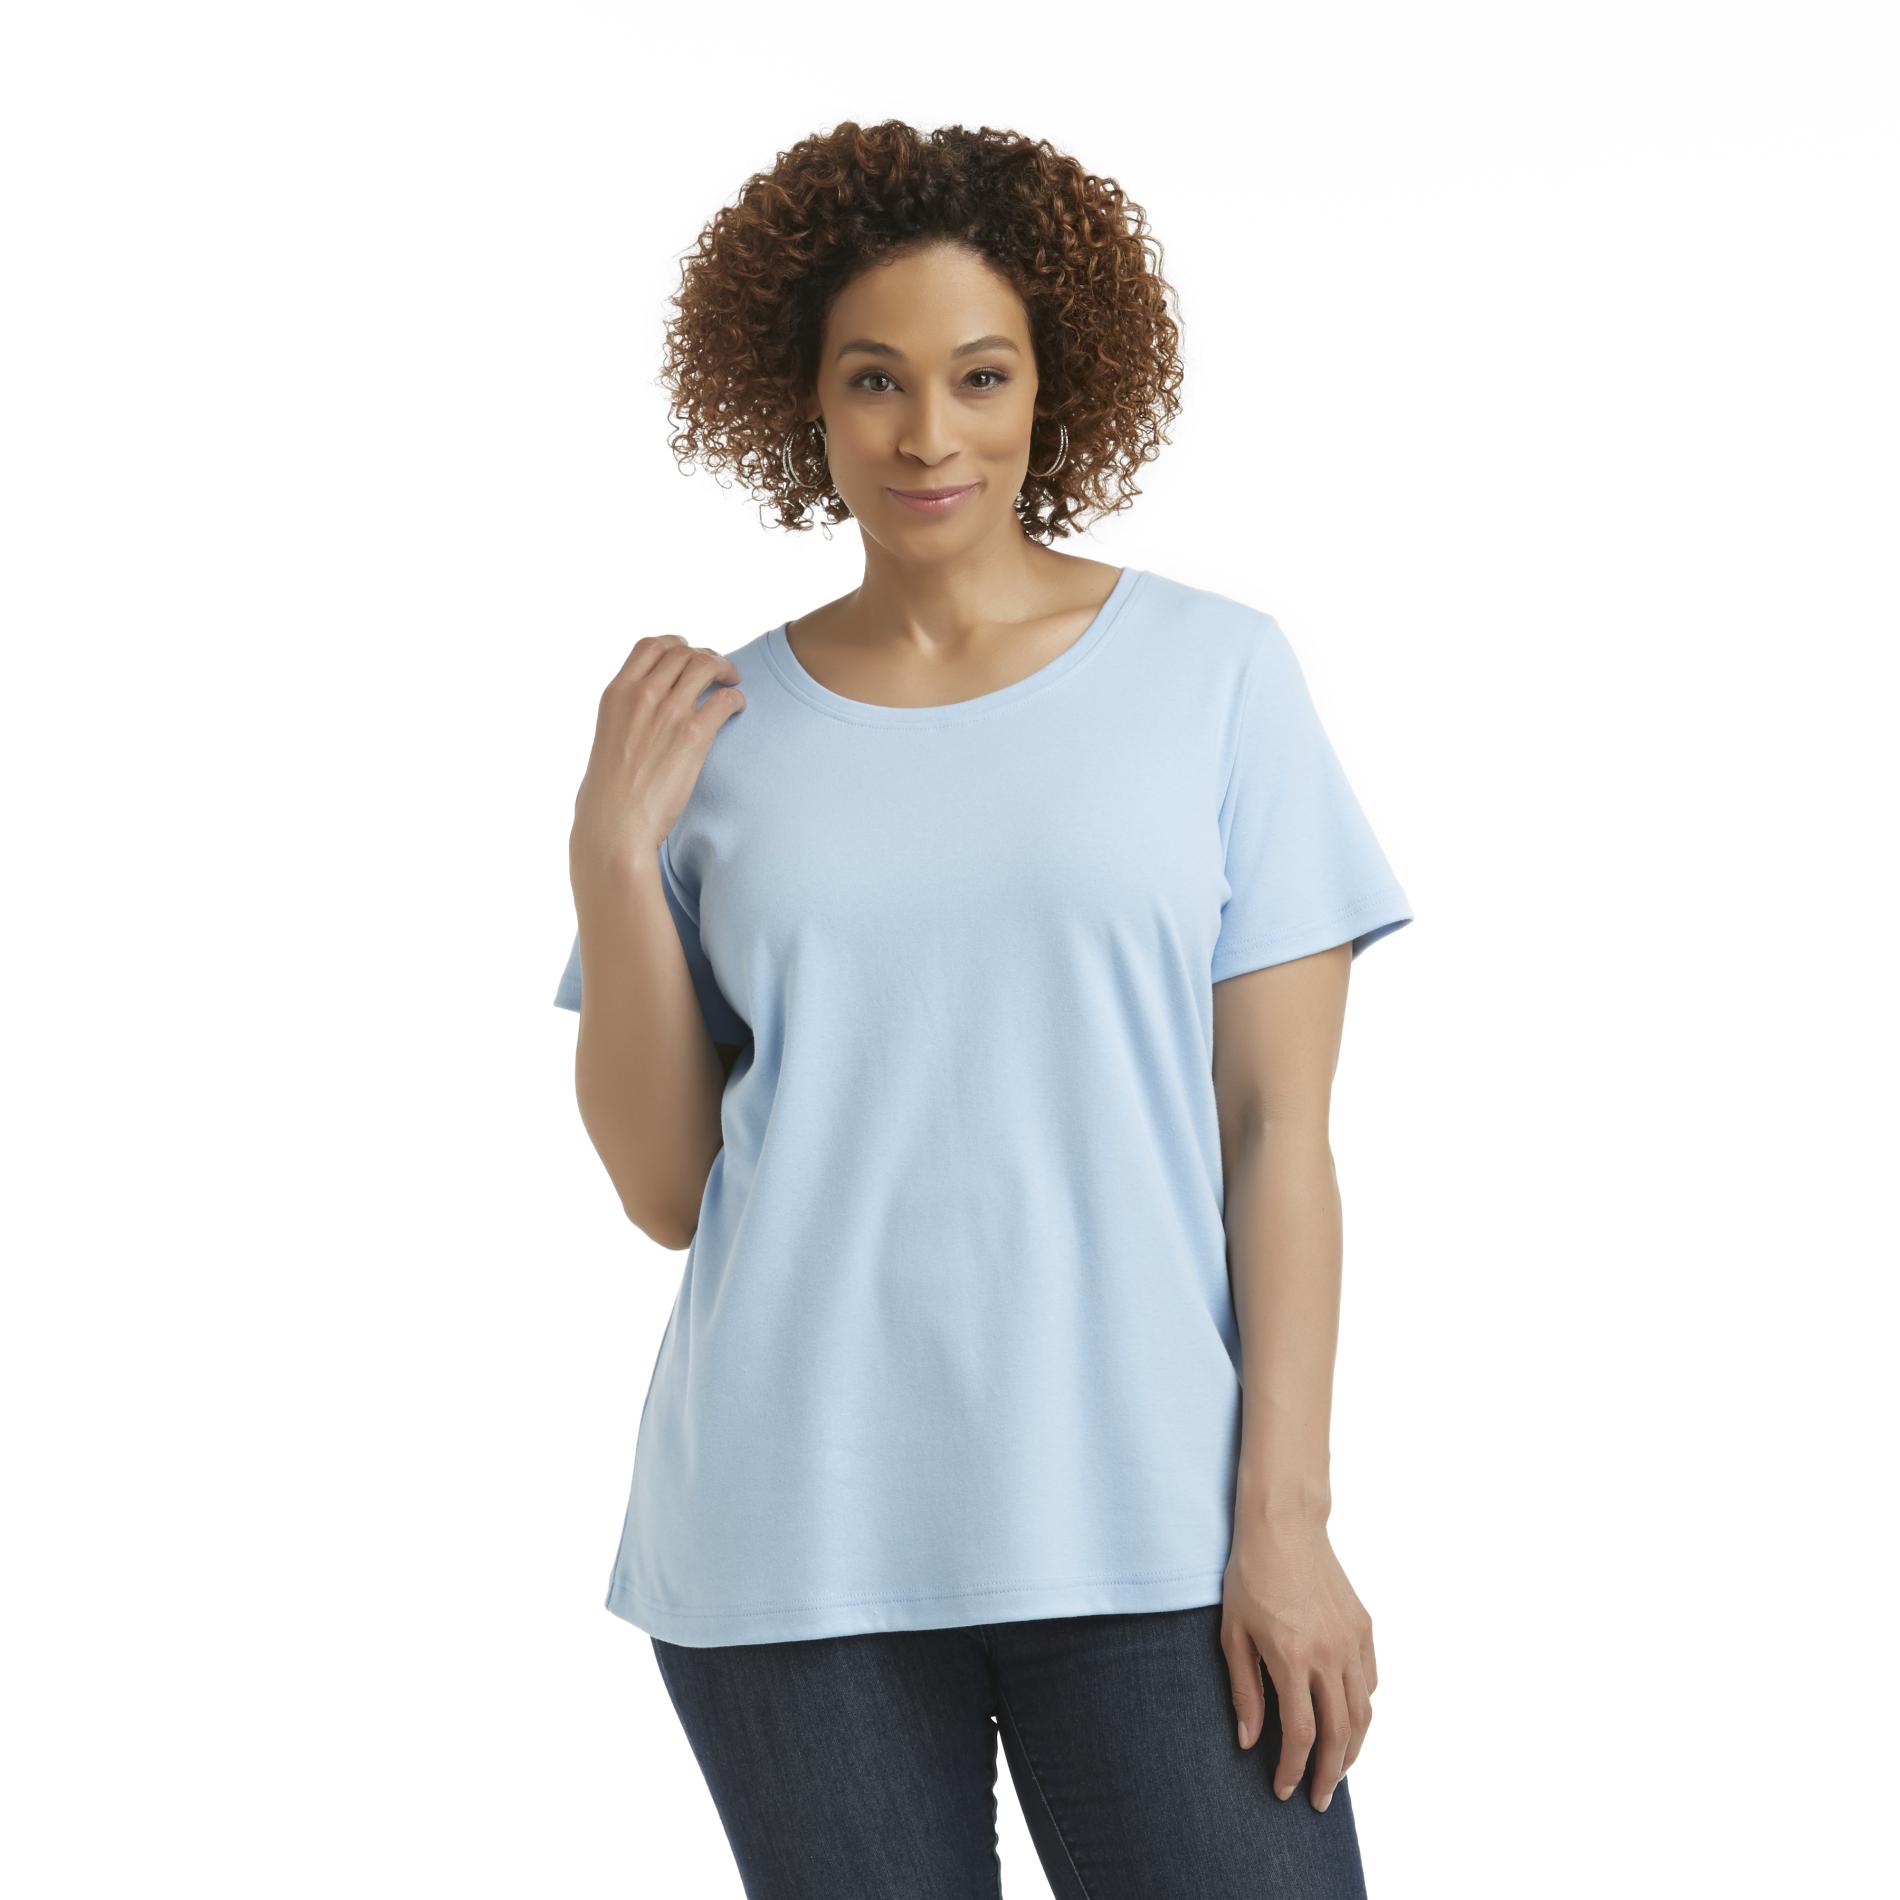 Basic Editions Women's Plus Relaxed-Fit T-Shirt